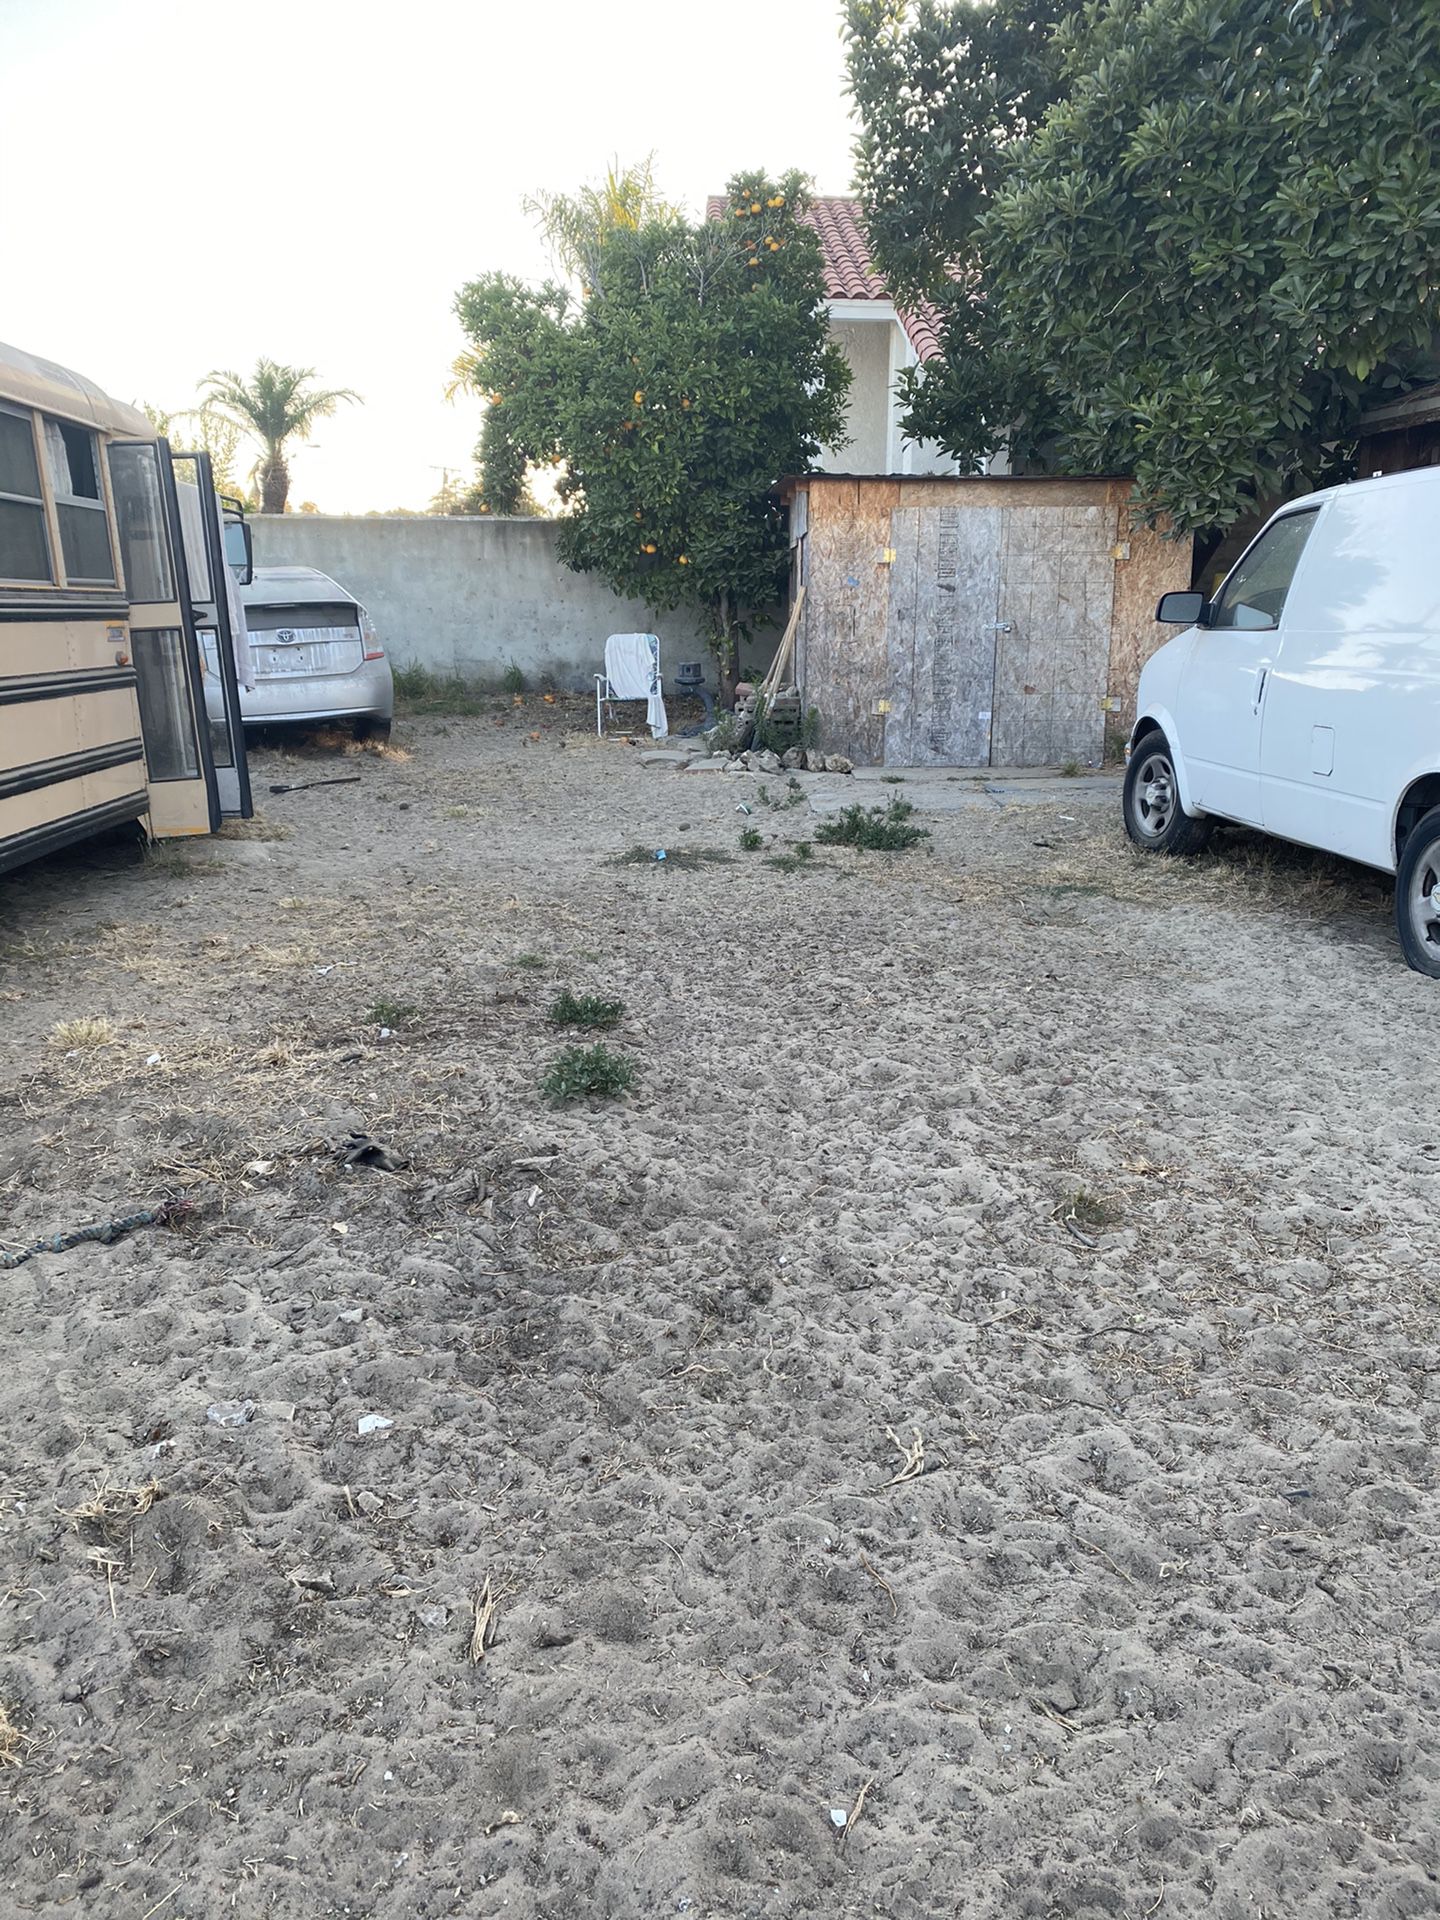 Renting backyard space for small RV, small Schoolie, or Van